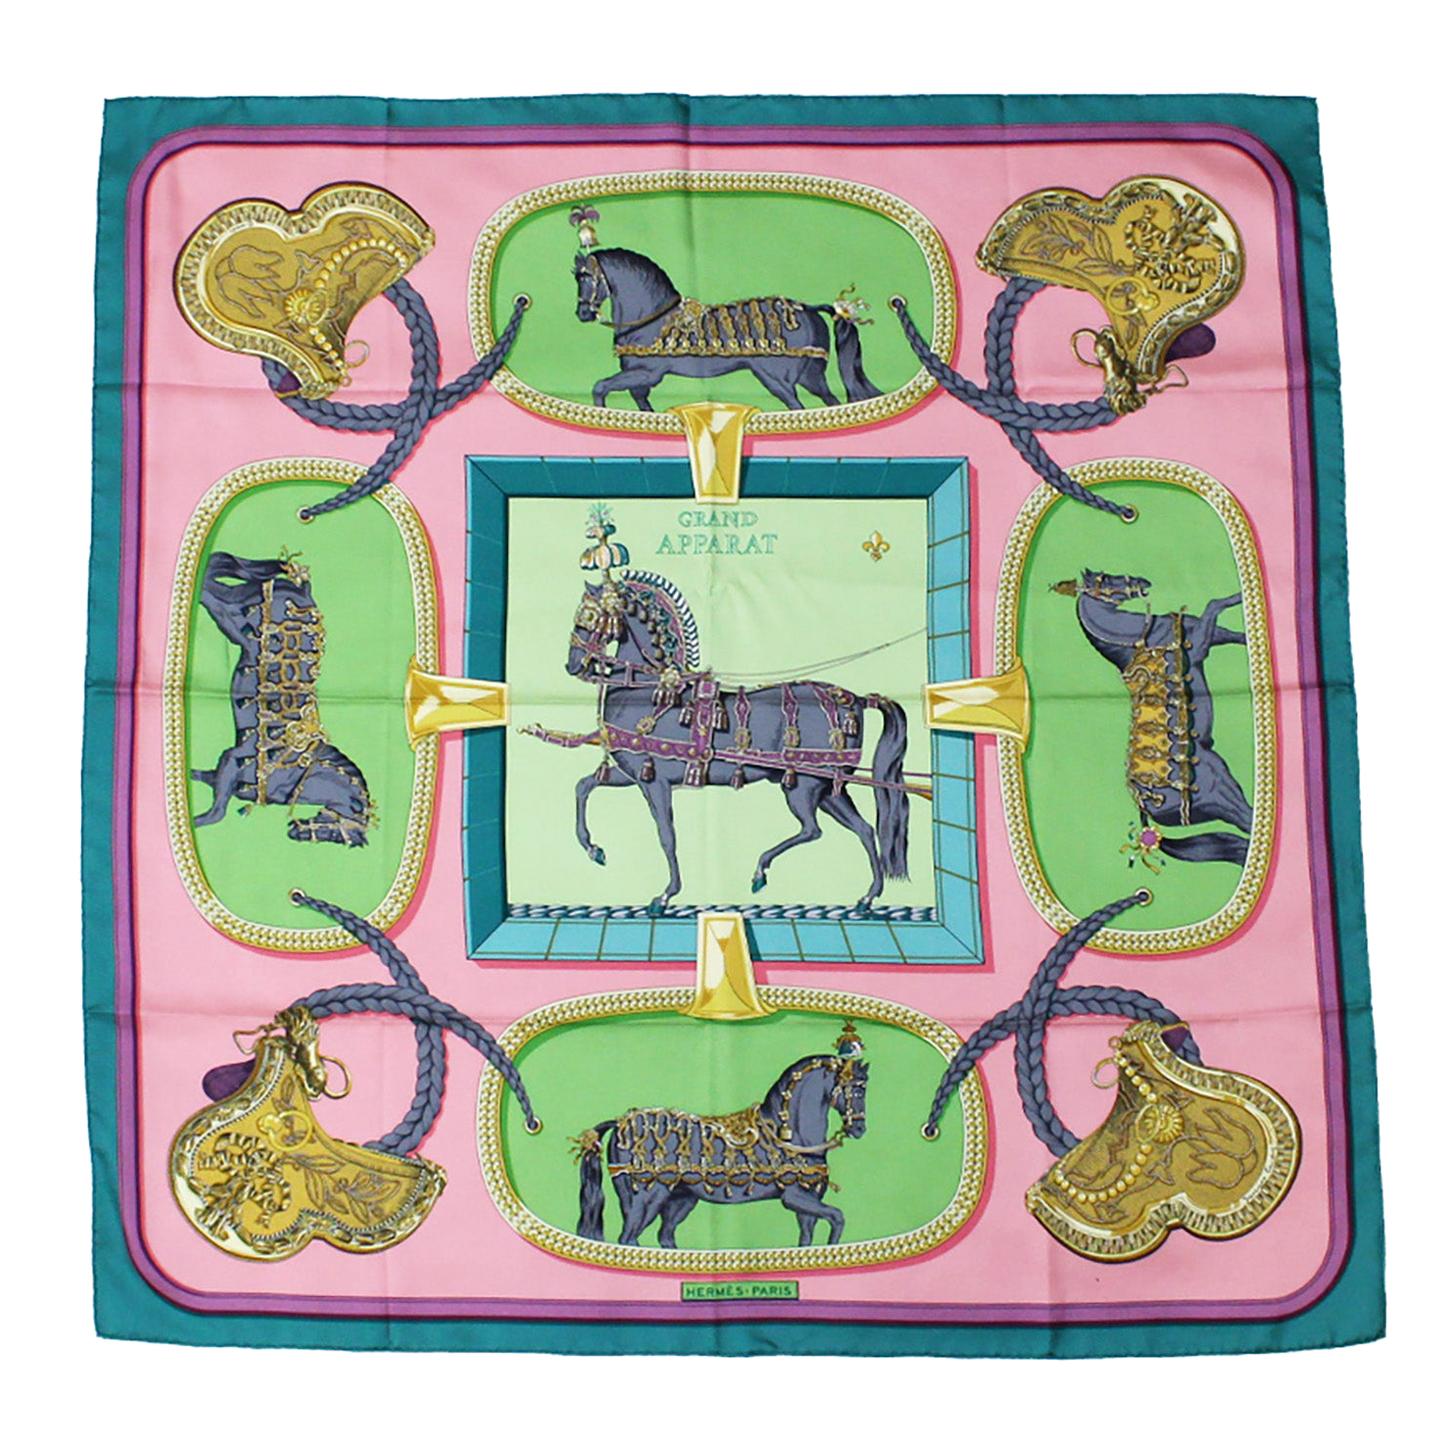 Hermes Green, Rose & Pistache Grand Apparat Silk Scarf Created by Jacques Eudel